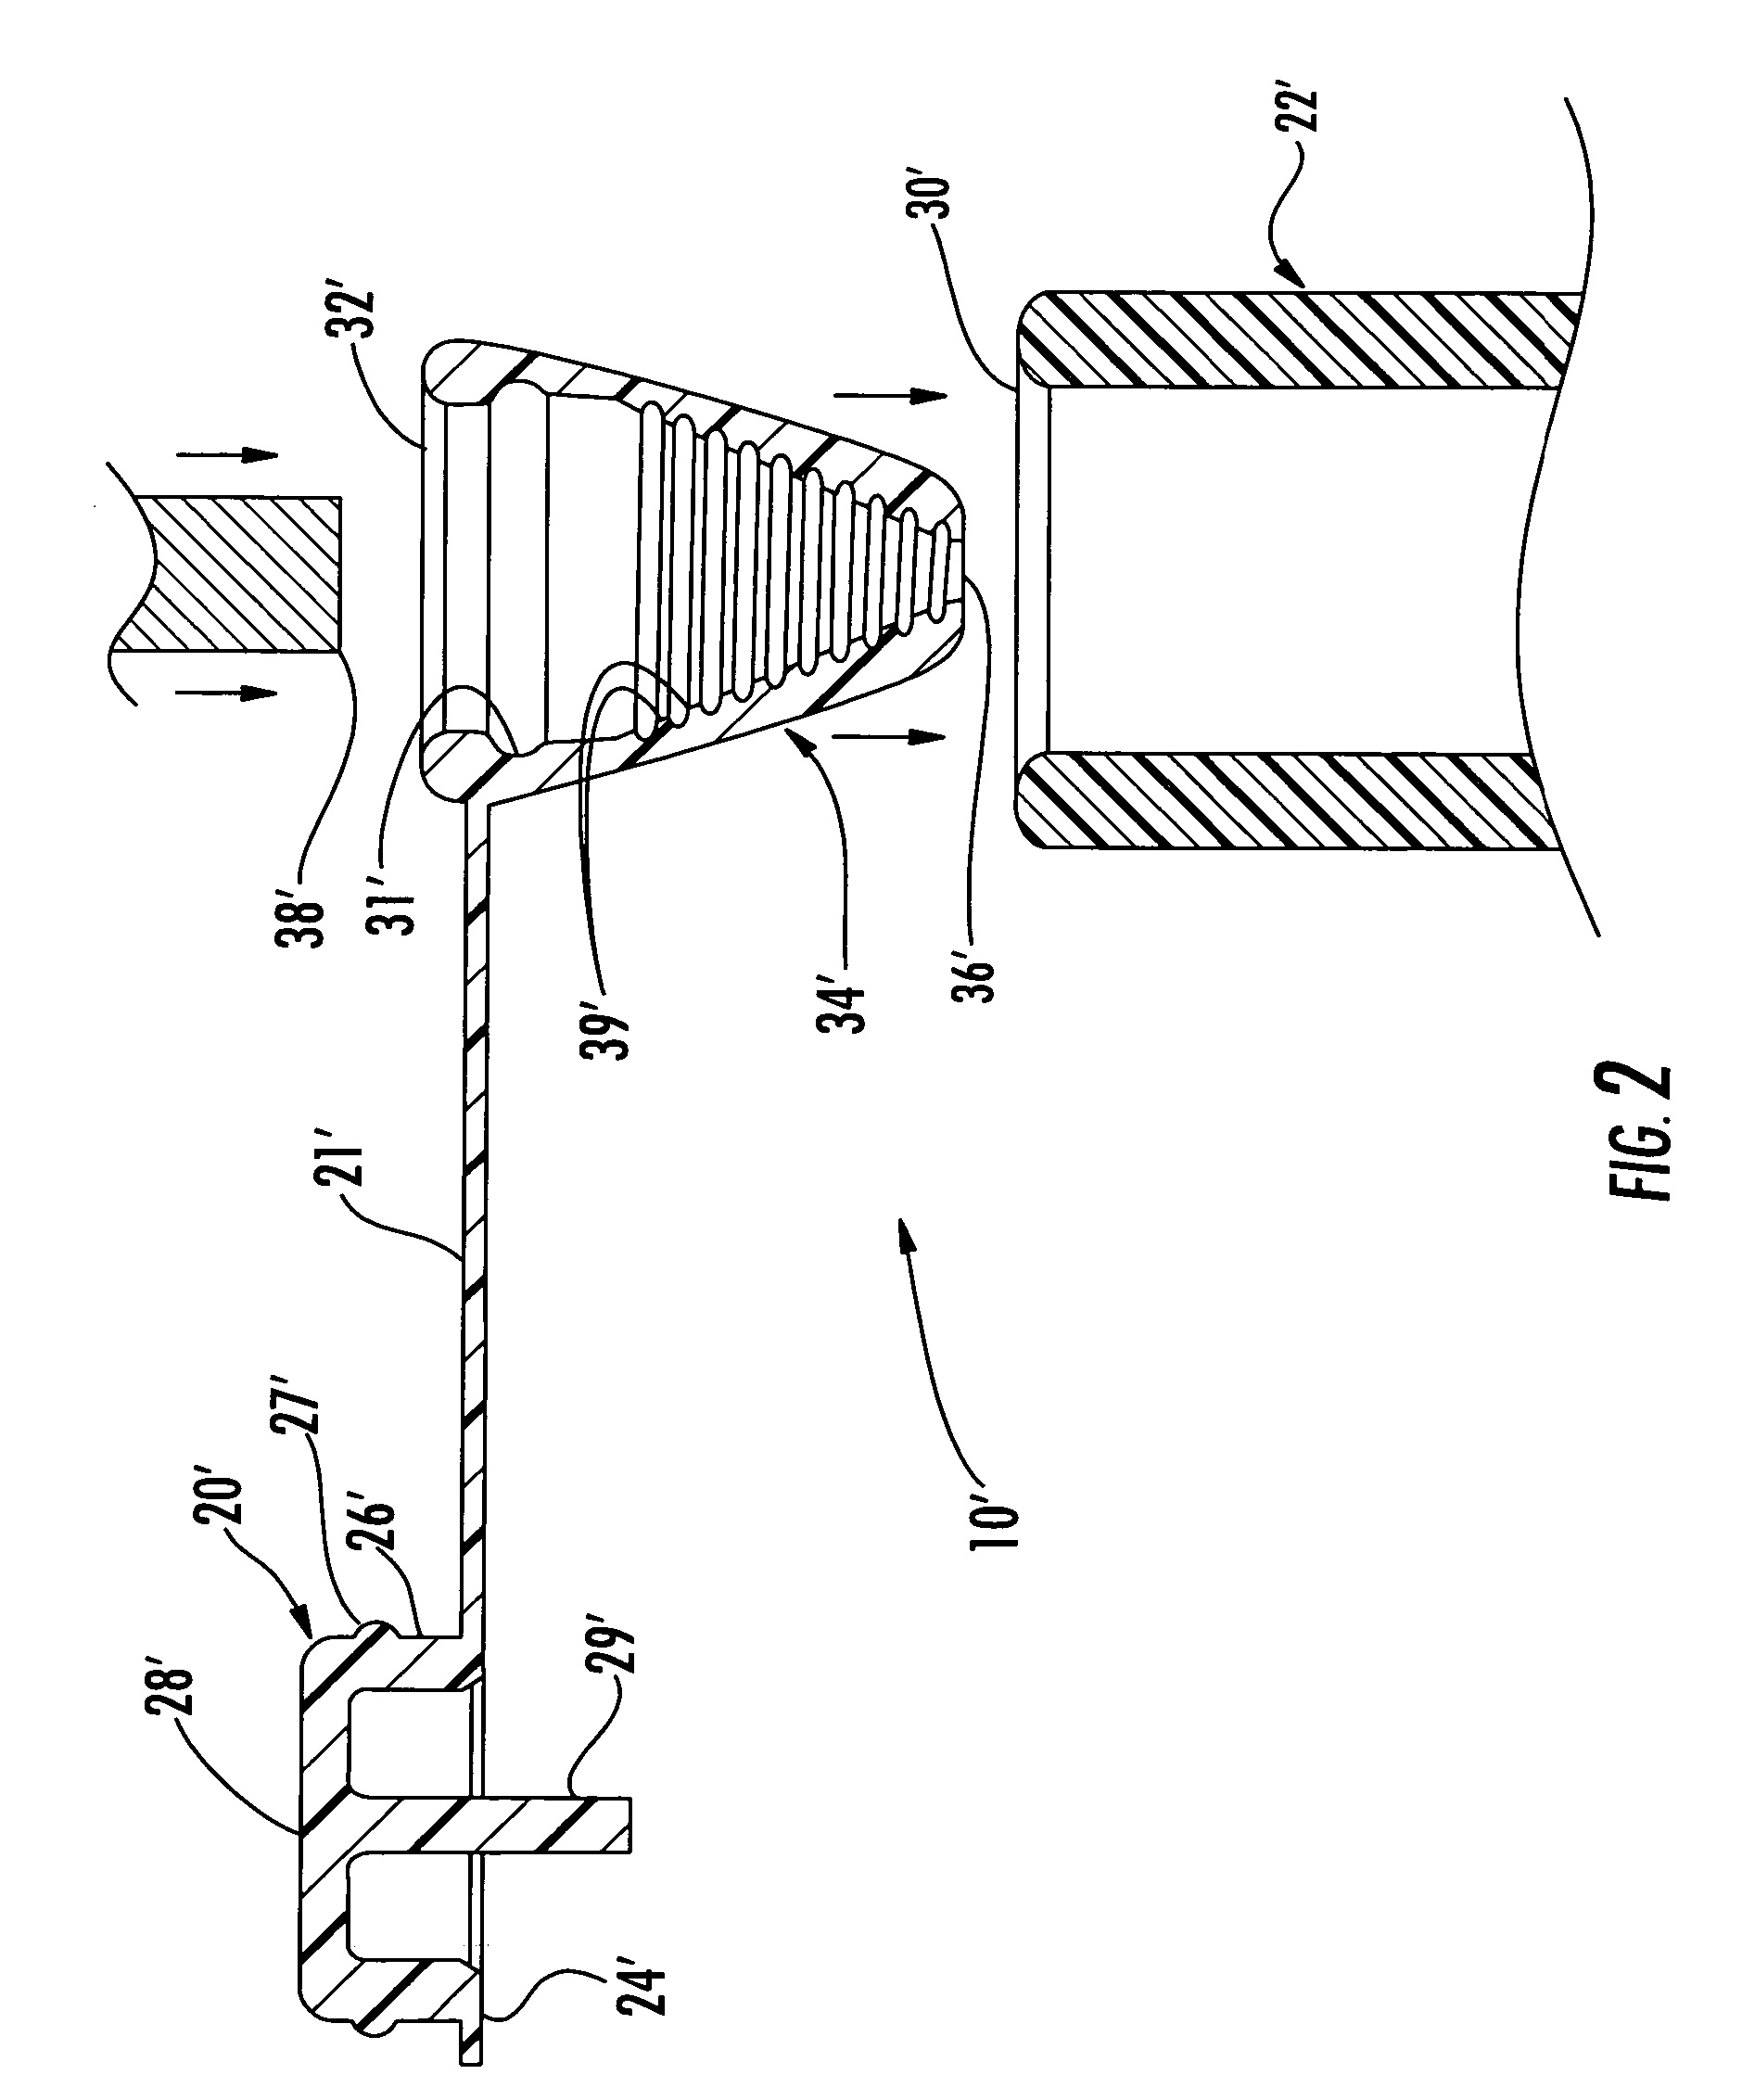 Reusable insulating and sealing structure including tethered cap and associated methods